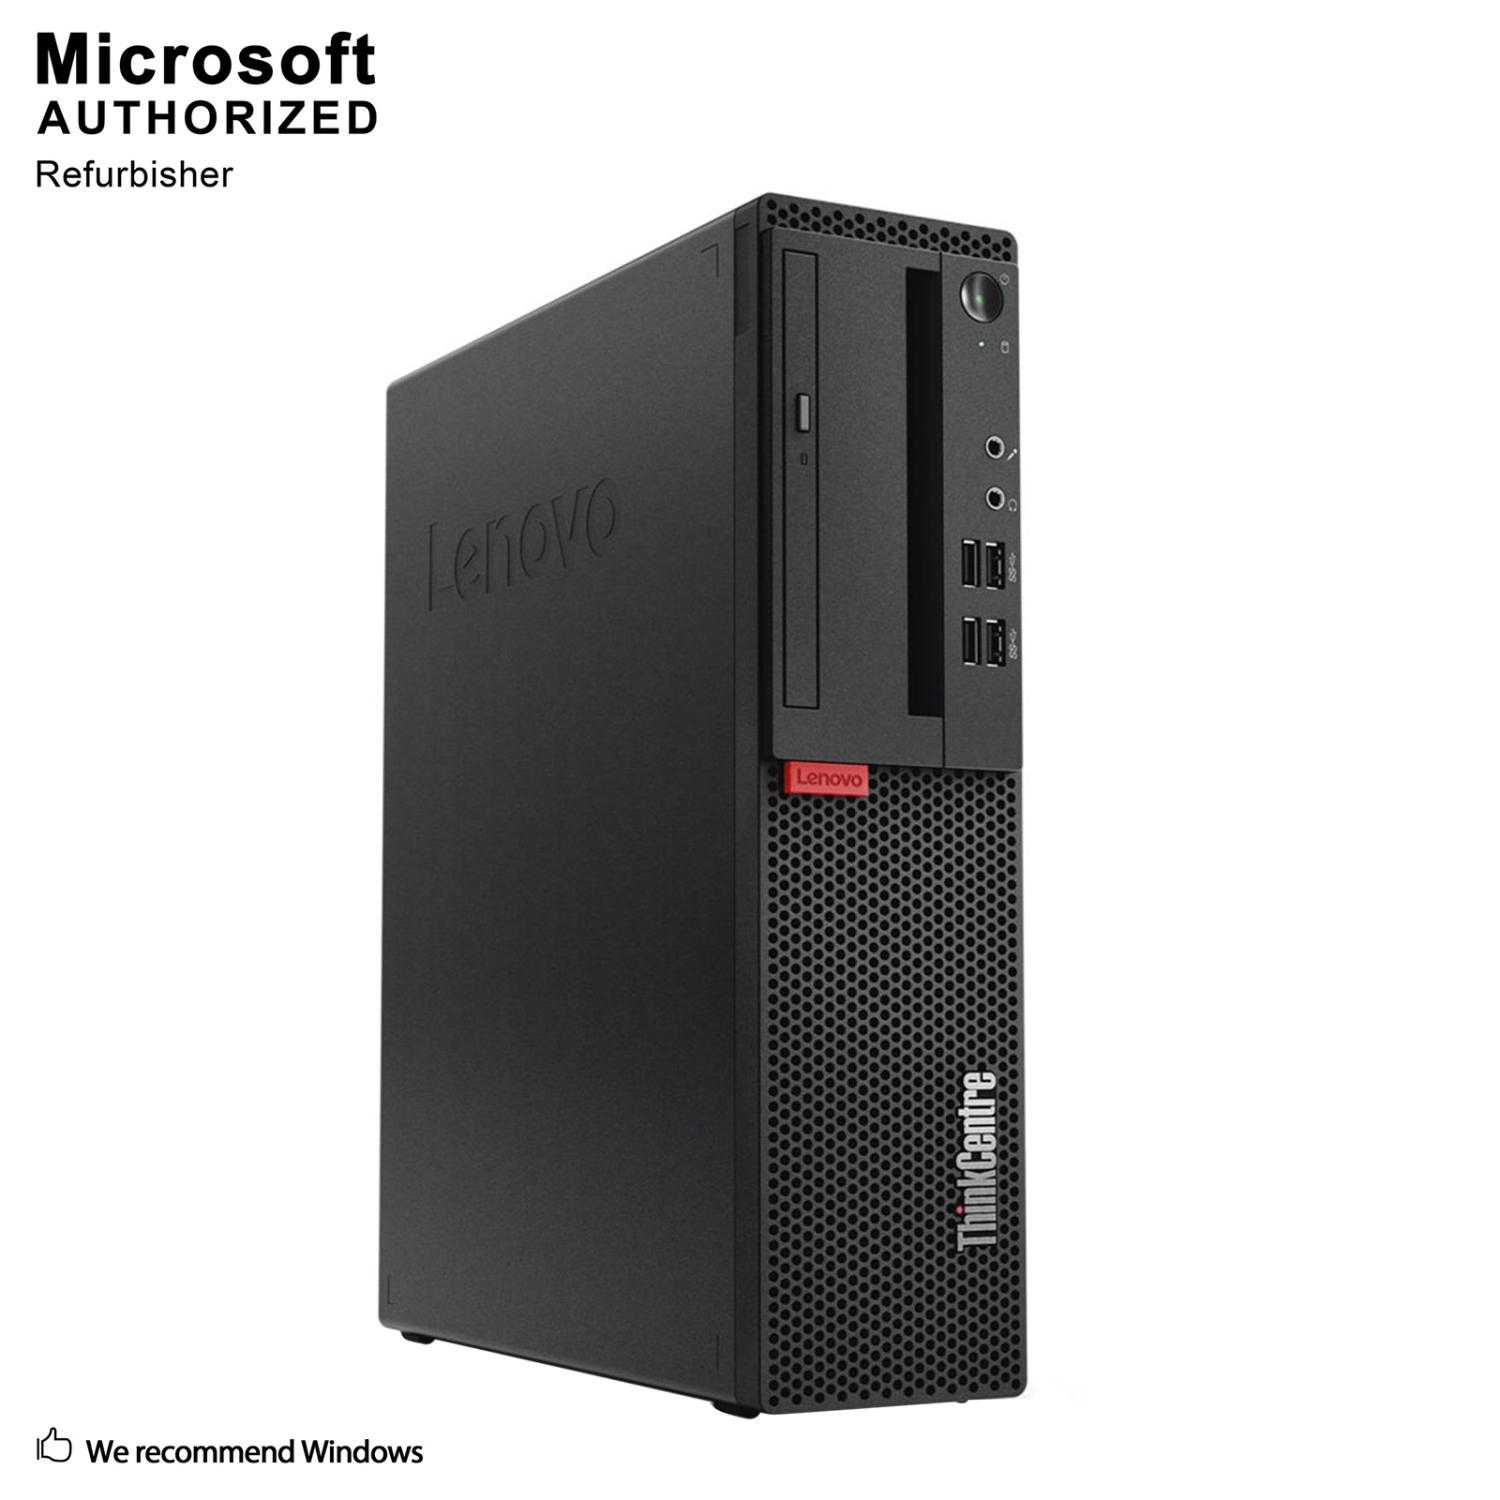 Refurbished (Good) - Lenovo ThinkCentre M910S SFF PC, Intel Core I5-6500 3.2Ghz, 16G DDR4, 1 TB HDD, DVD, 4K Support, Keyboard & Mouse, Win 10 Pro 64-bit (EN/ES/FR)